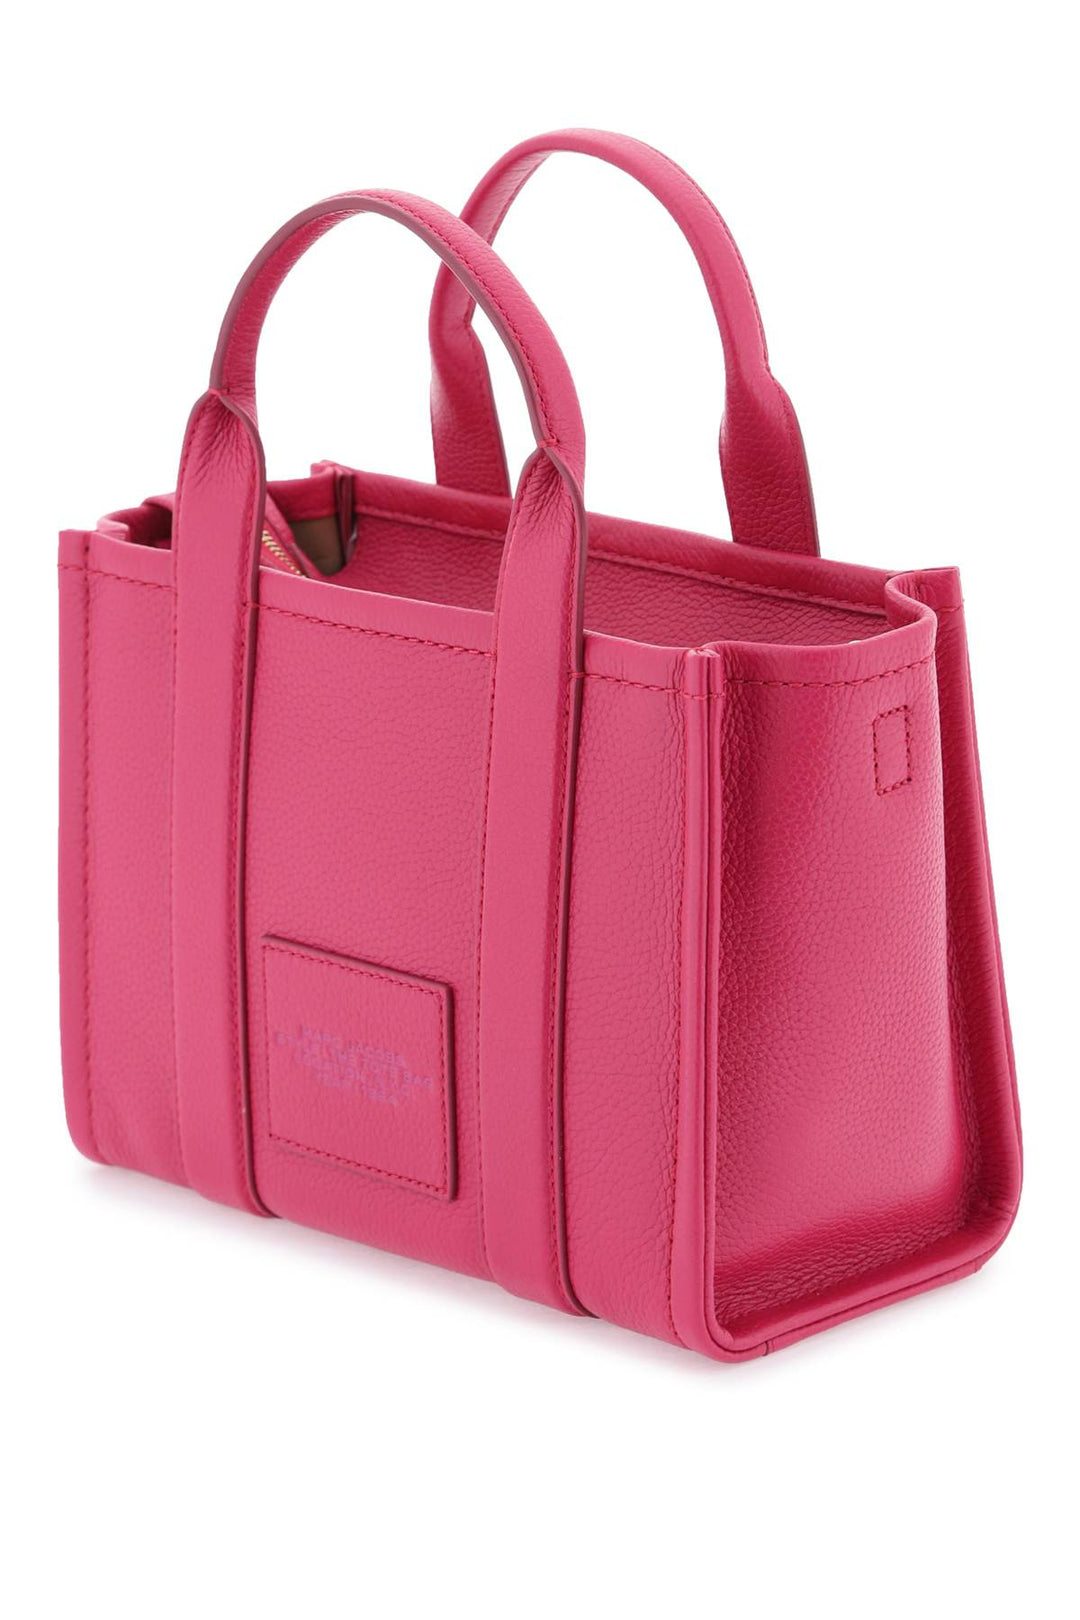 Marc Jacobs The Leather Small Tote Bag   Rosa